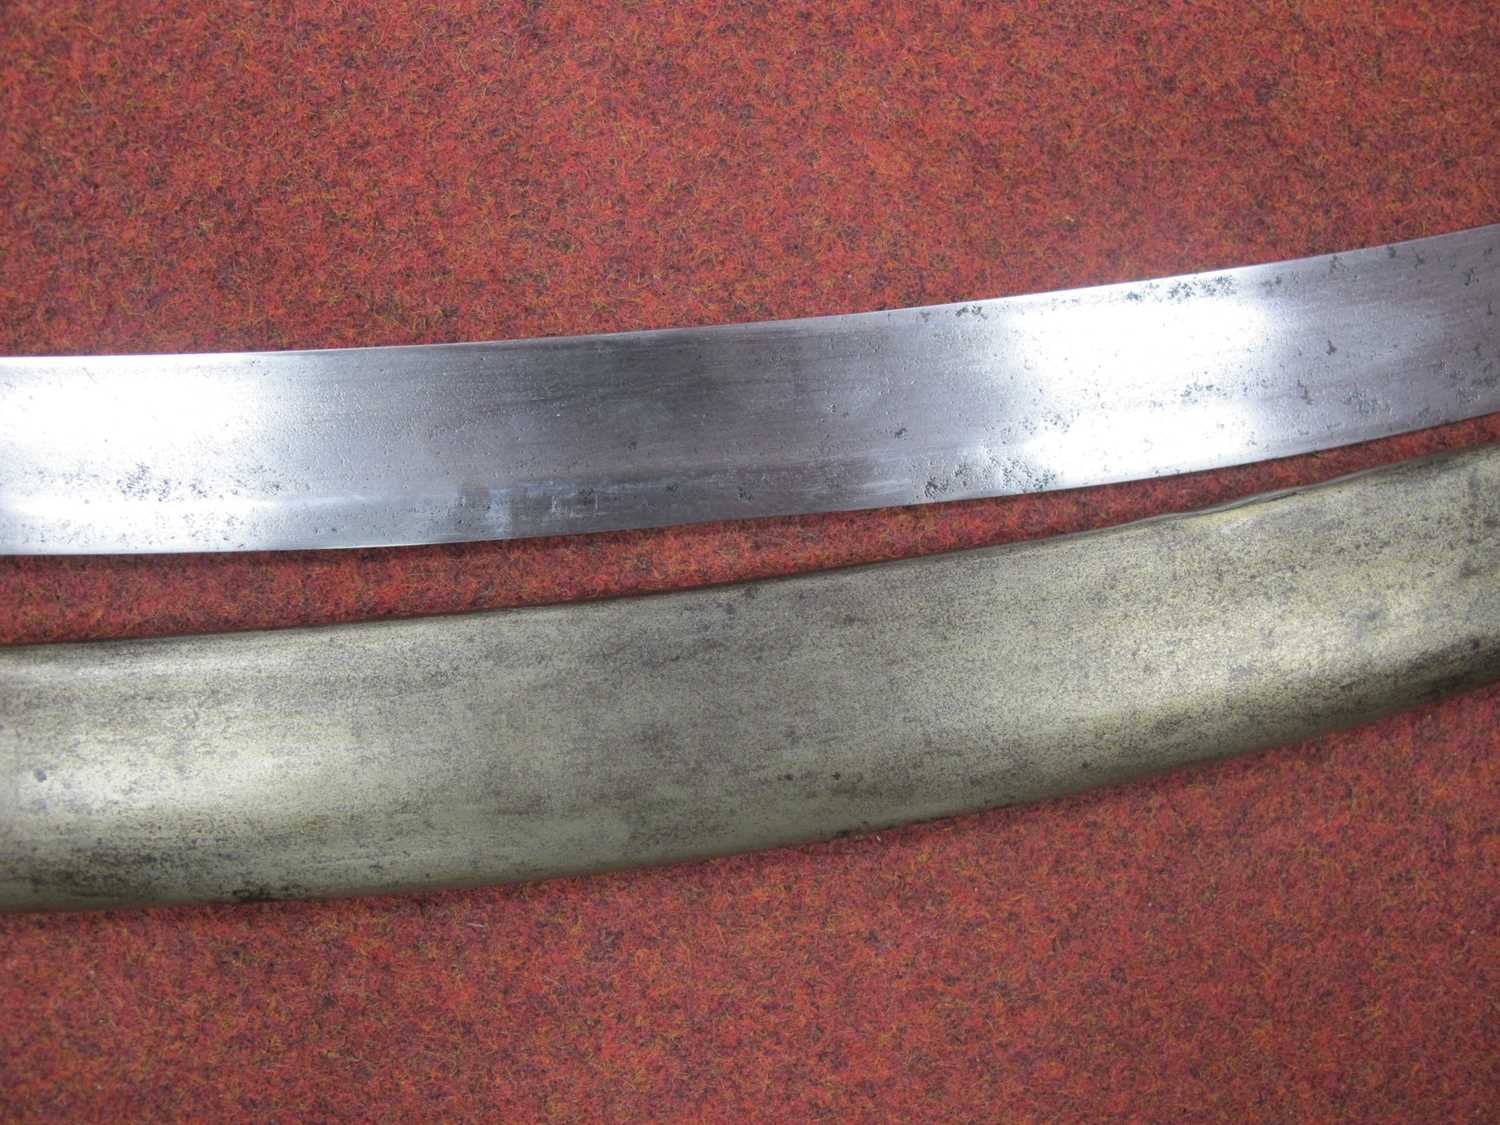 Light Cavalry Type Sabre and Scabbard, with possible modification replacement of grip and guard, - Image 19 of 20